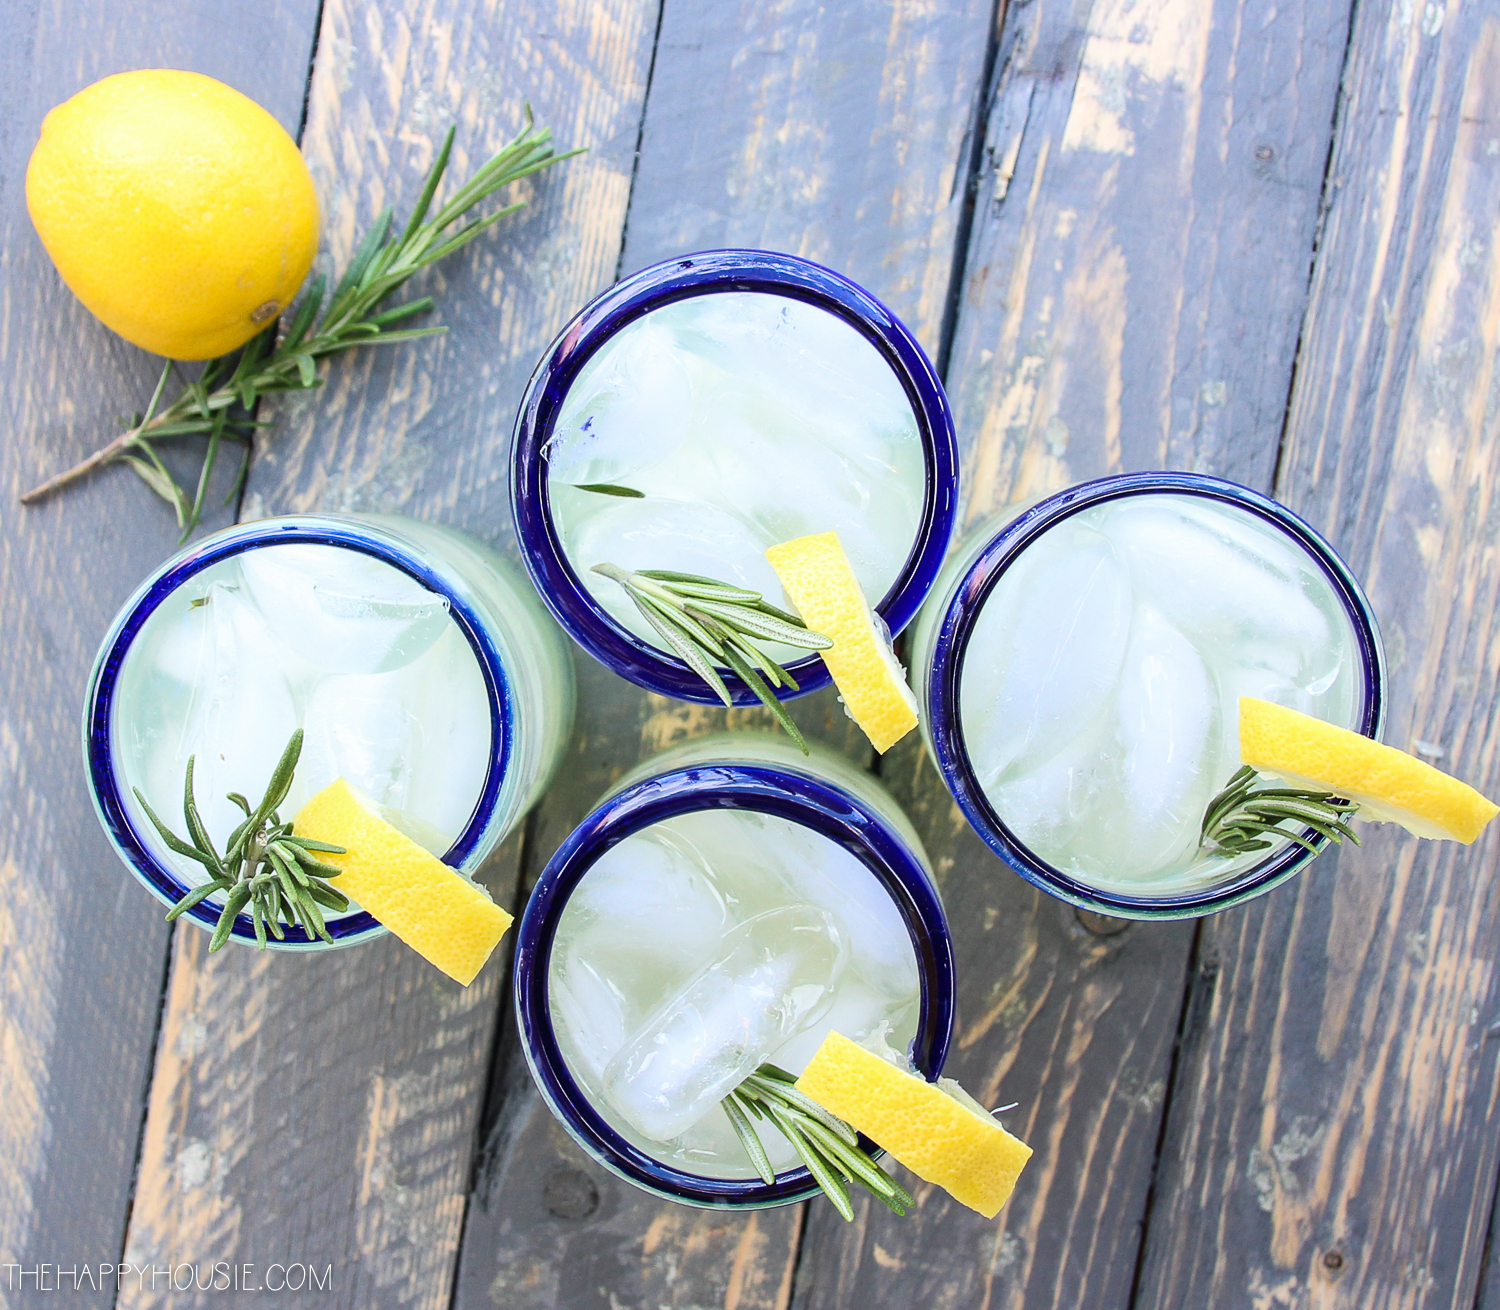 Clear glasses with blue rims and a sprig of rosemary with a slice of lemon on the rim.